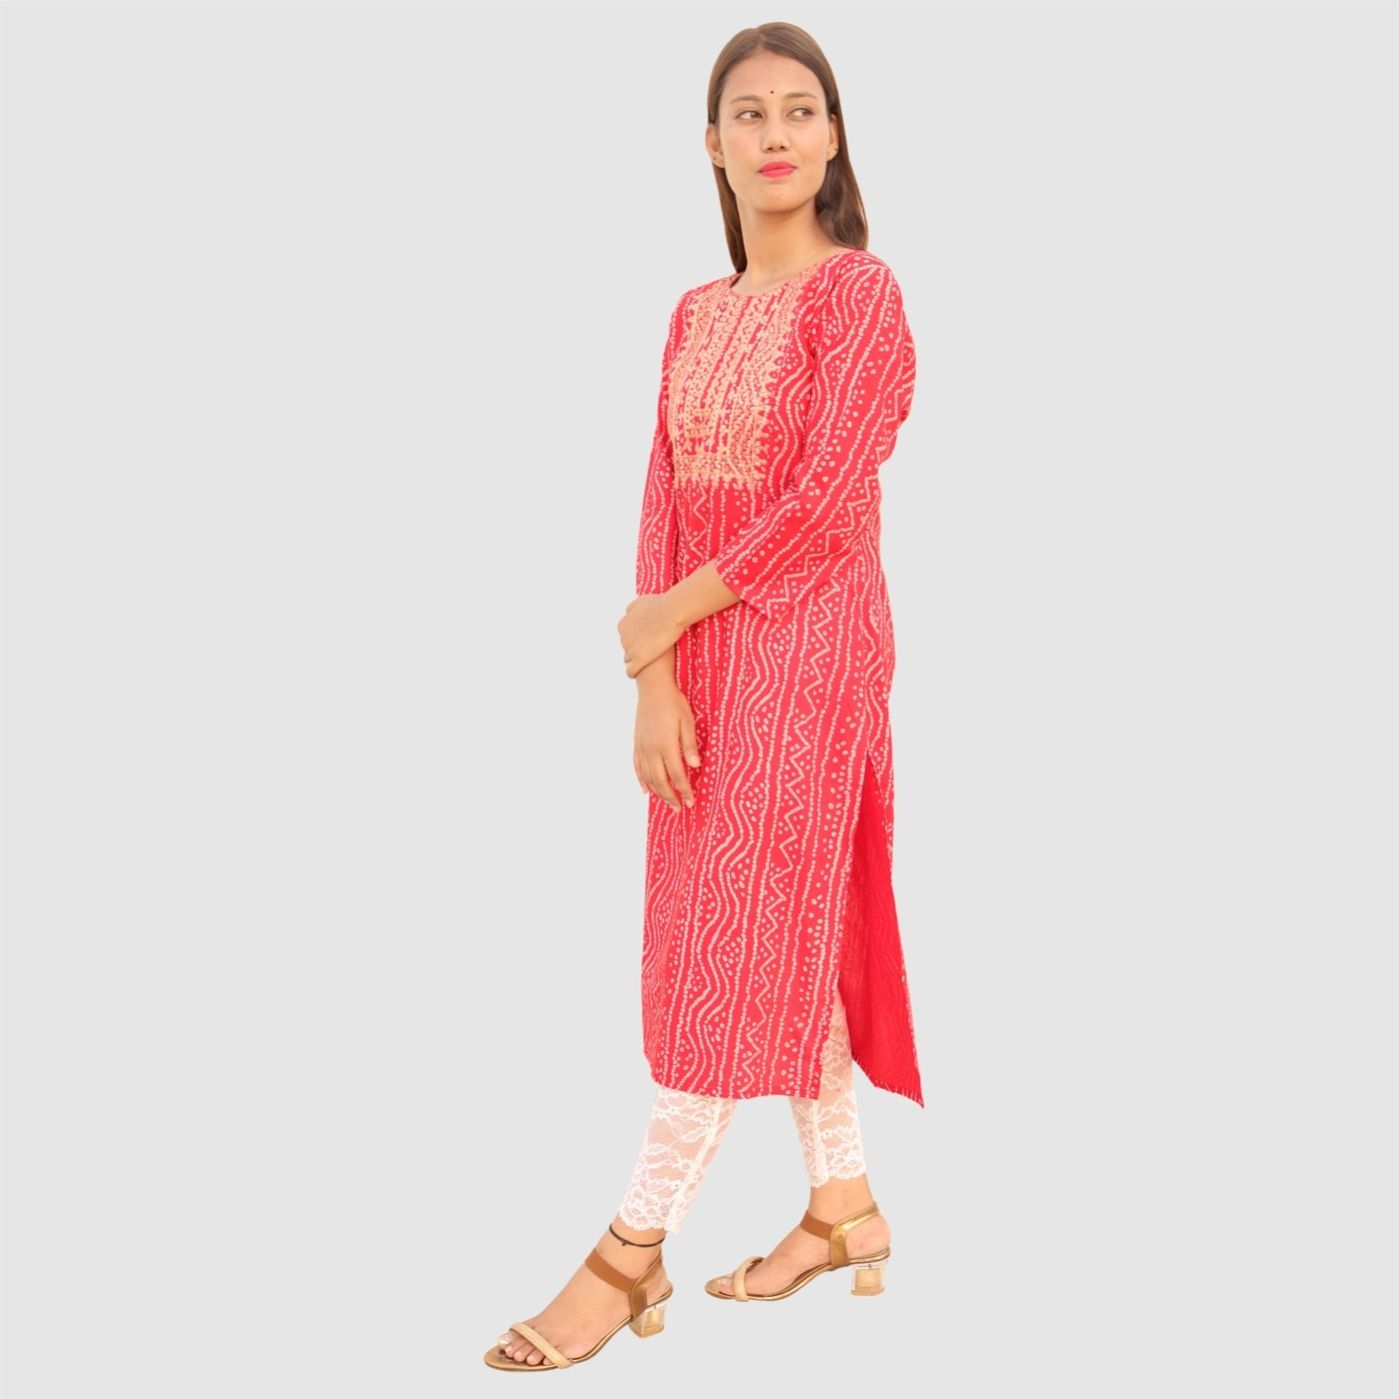 Red Embroidery Worked Kurti with Yellow Chunari Print Shawl for Women  (416-101) - Send Gifts and Money to Nepal Online from www.muncha.com